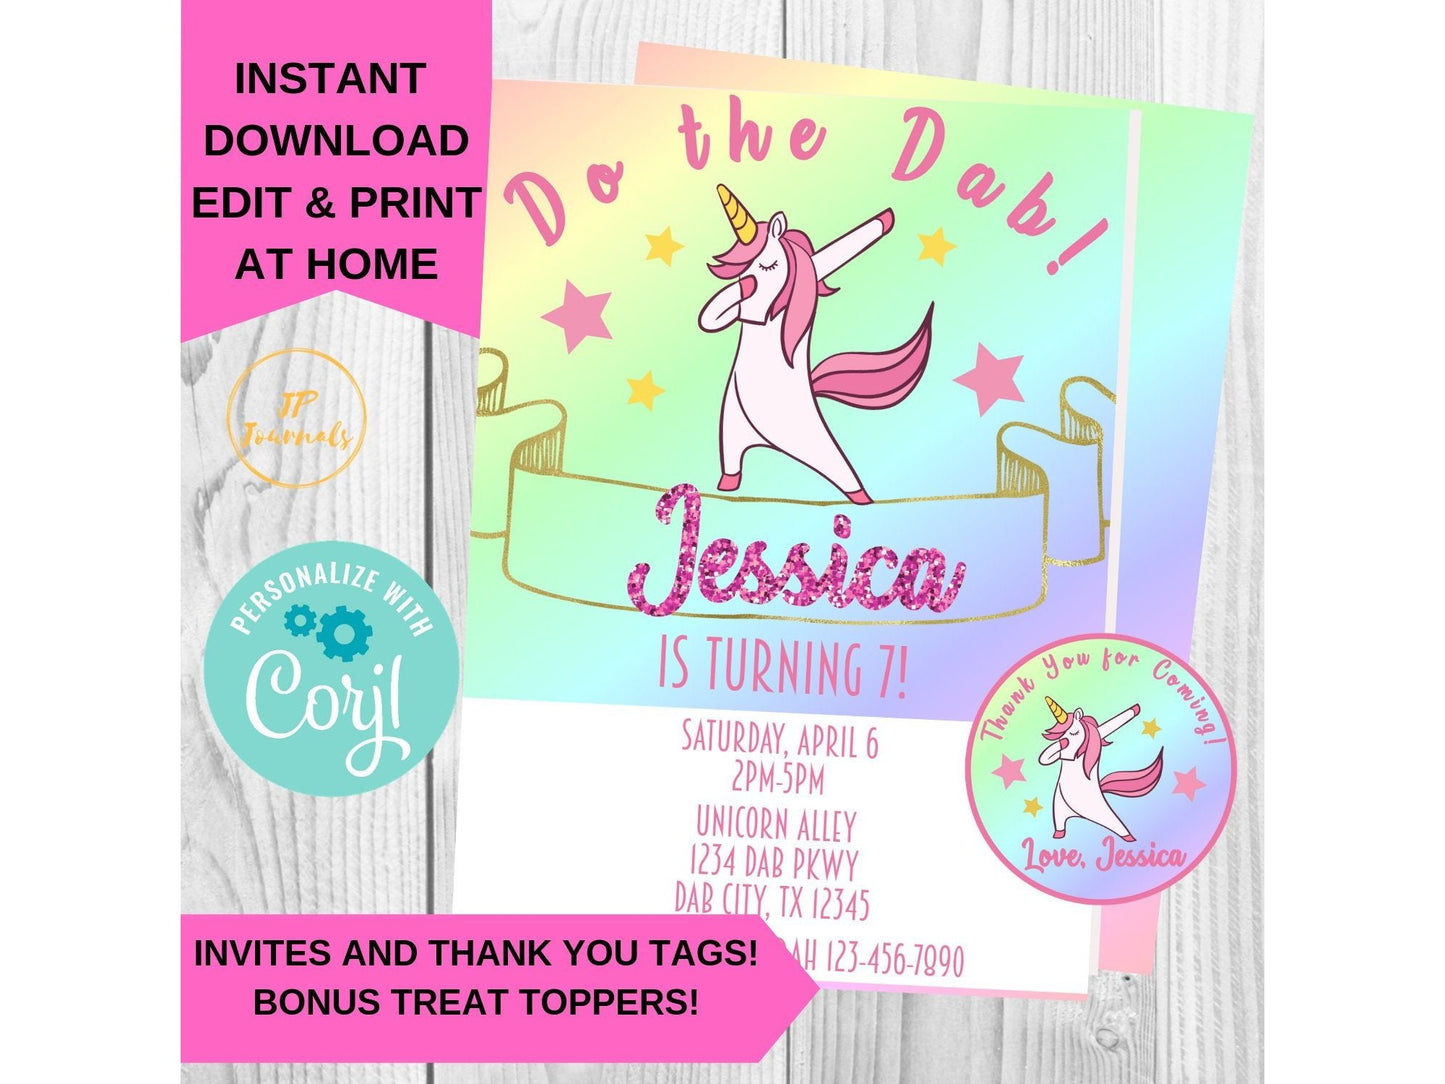 Dabbing Unicorn Rainbow Birthday Party Invitation & Favor Tags - DIY Edit and Customize Printable Invite - Download, Edit and Print at Home!